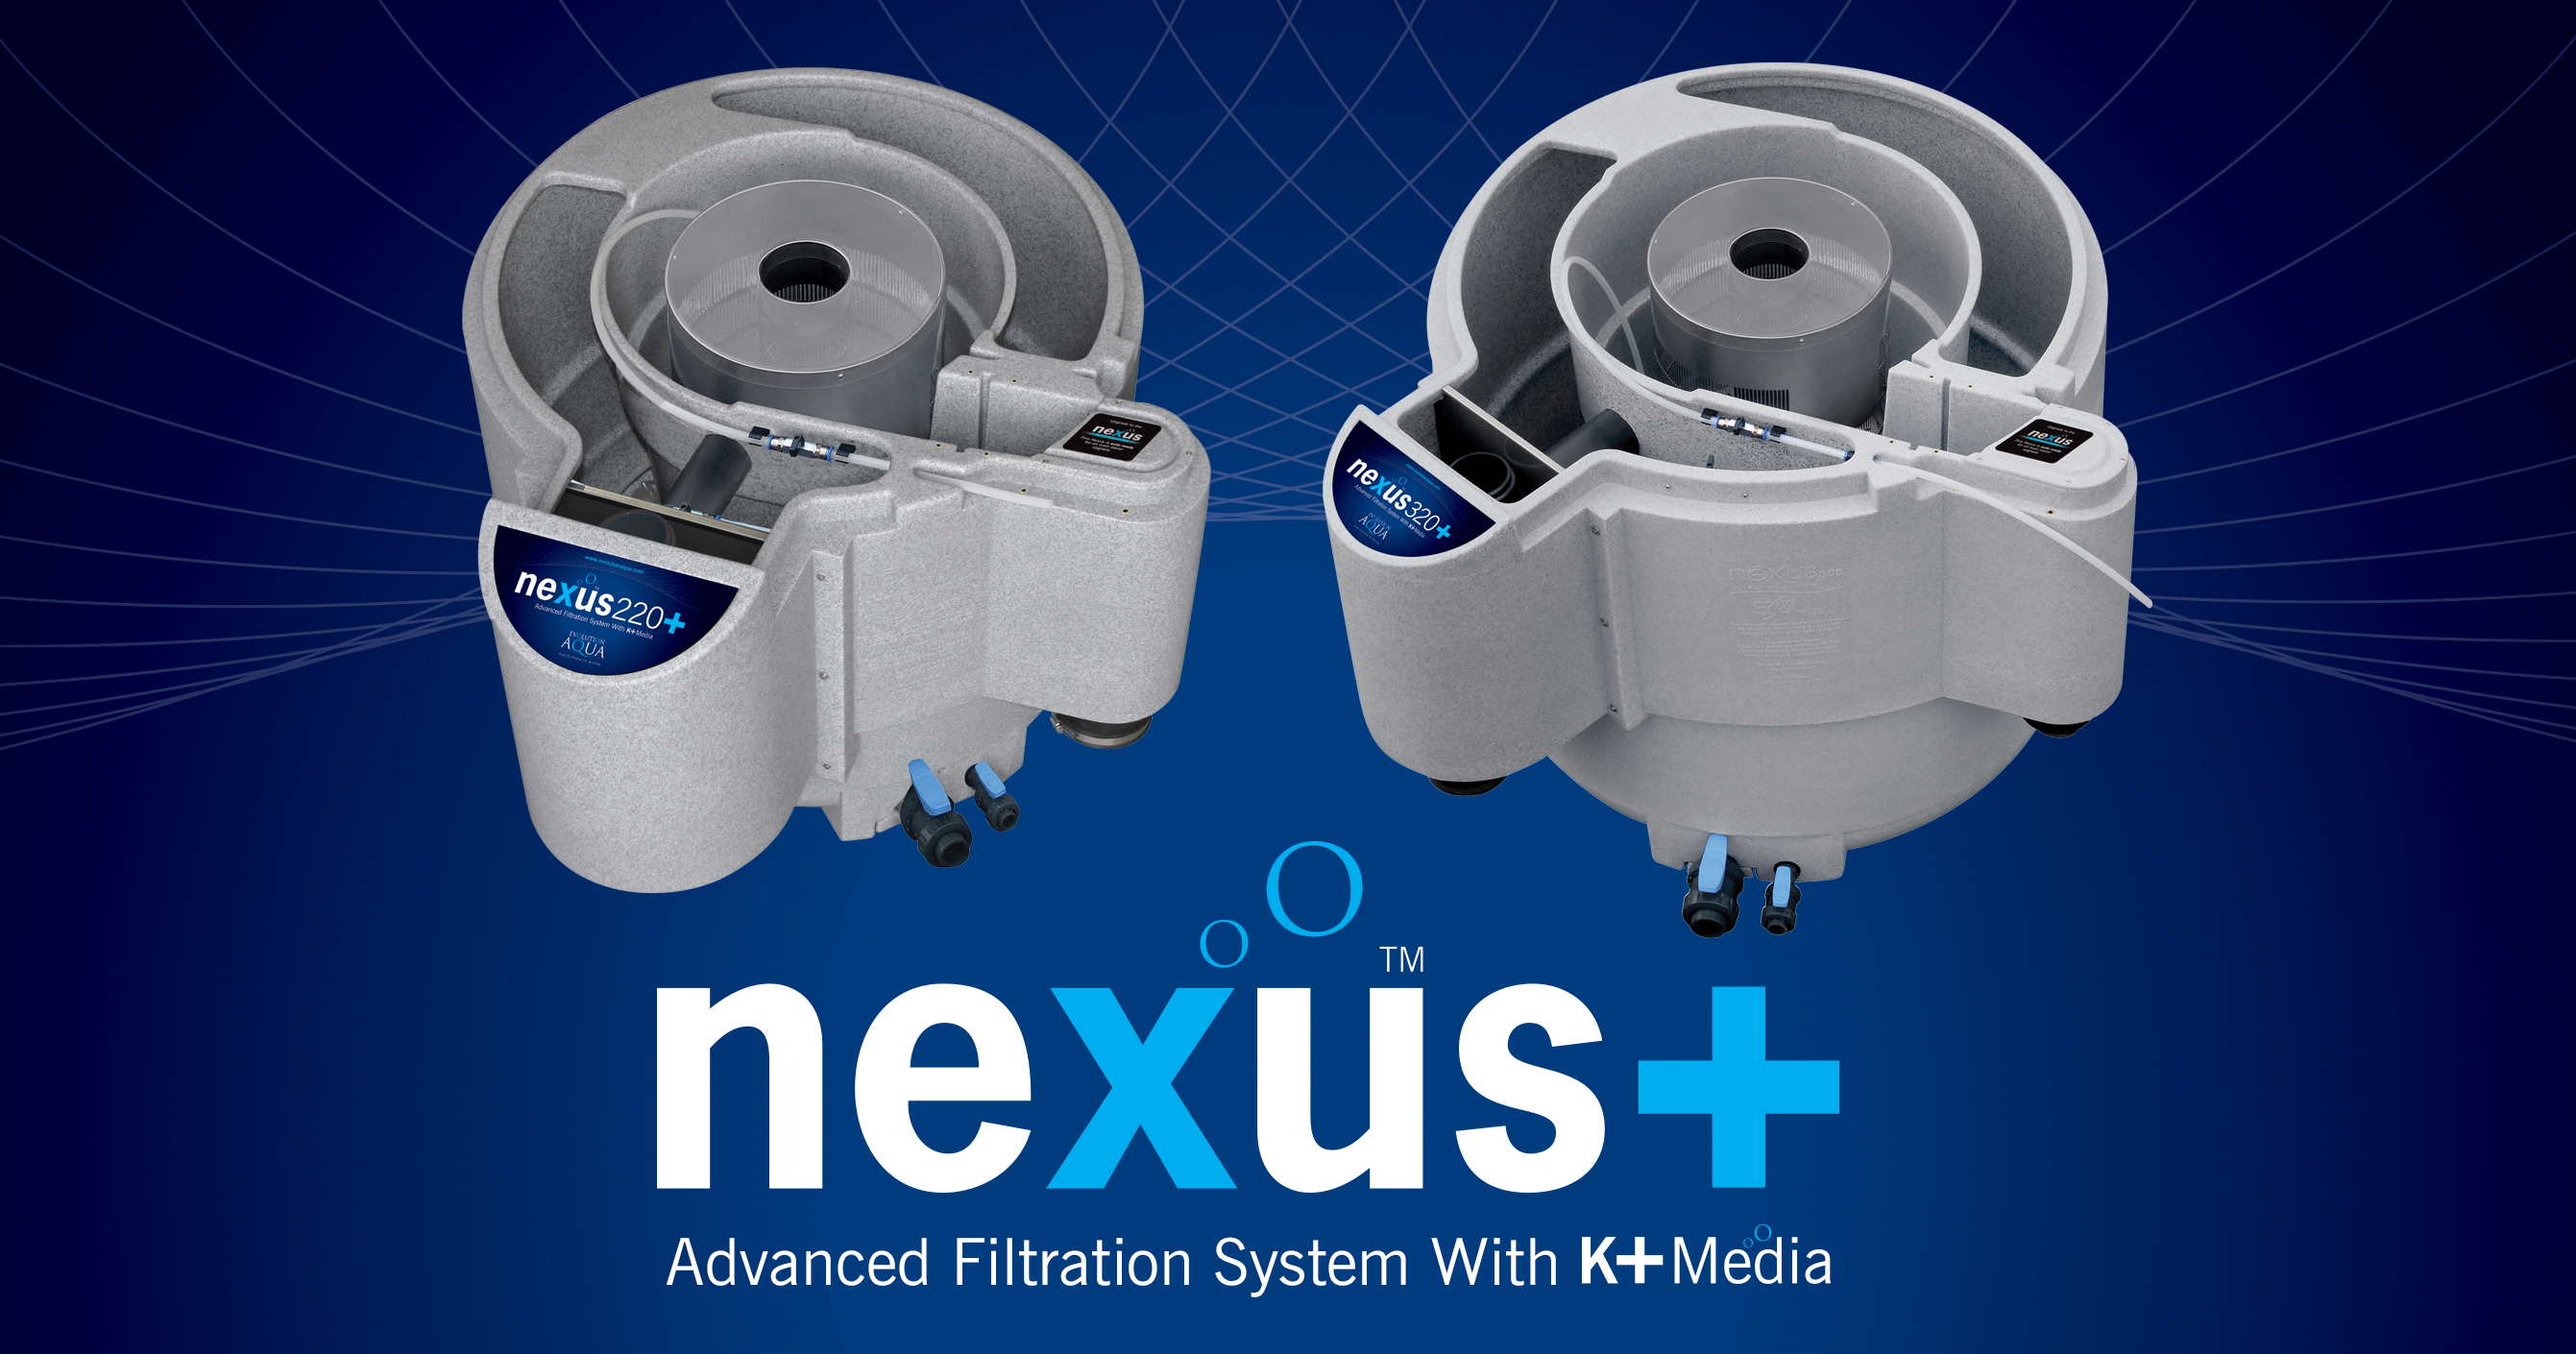 New Nexus+ Filtration Systems - Available Now